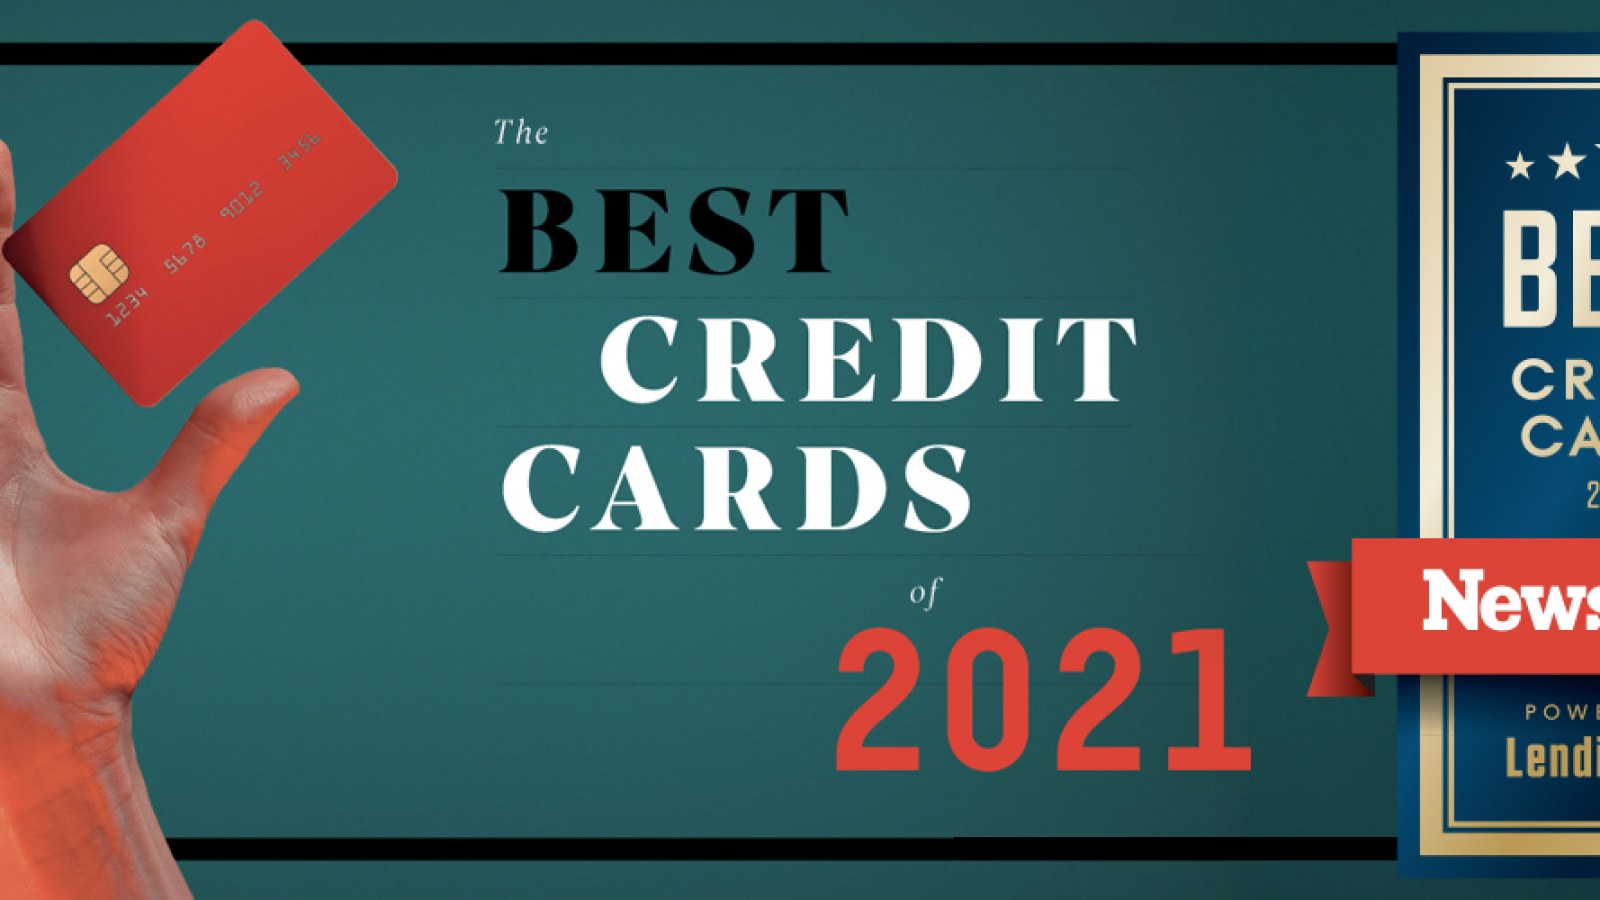 The Best Credit Cards Of 2021